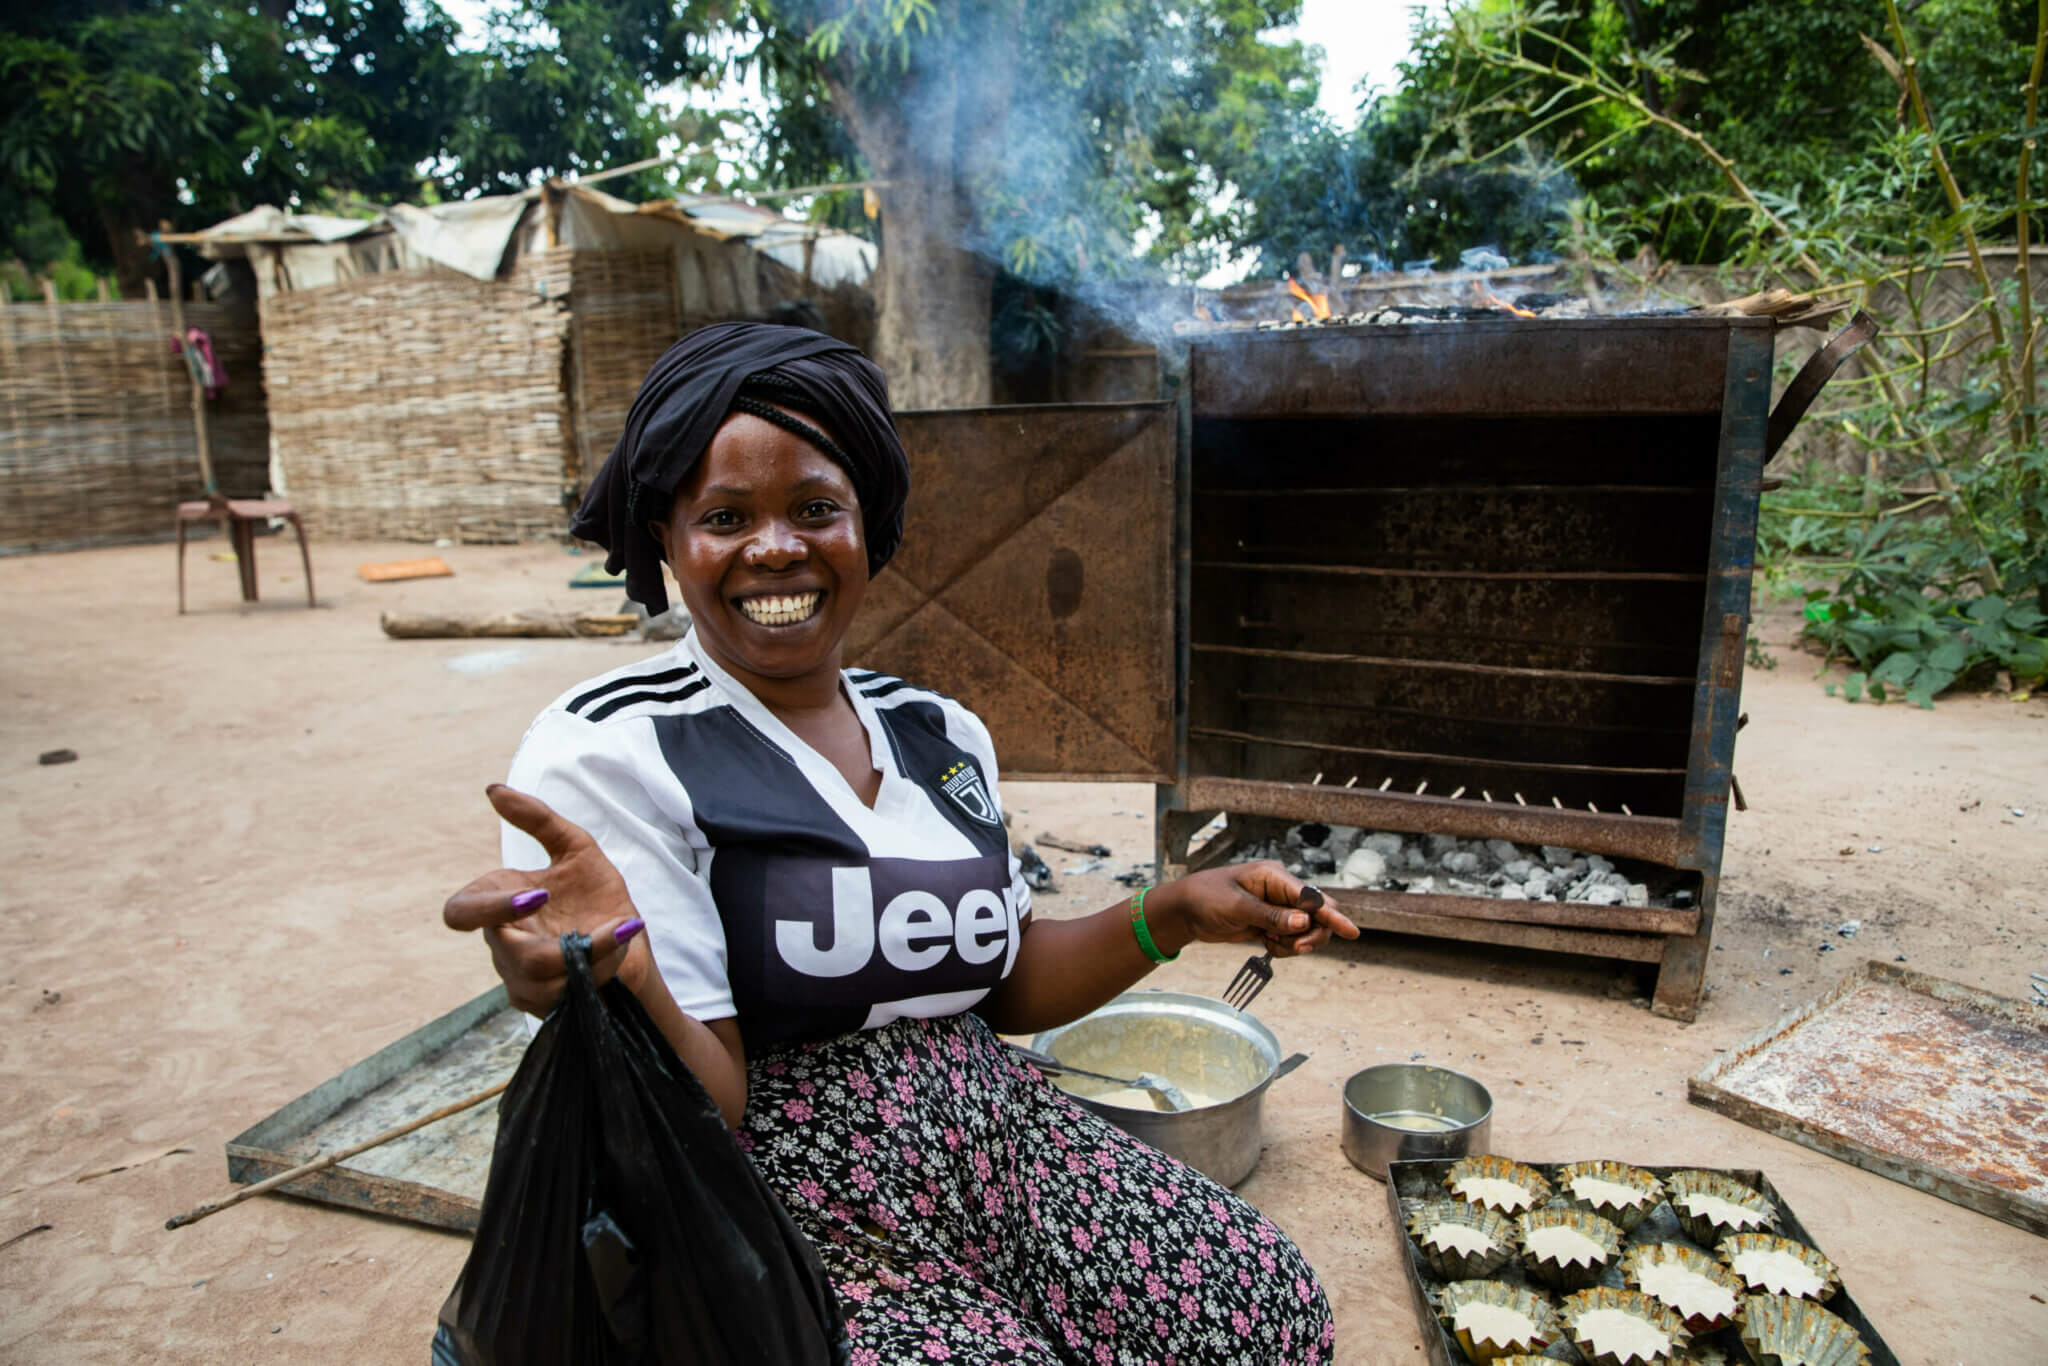 A woman with a black cloth on her head a white and black T-Shirt and a flowered skirt sits in her wheelchair and smiles into the camera. In the background you can see cakes in a form and a big oven.